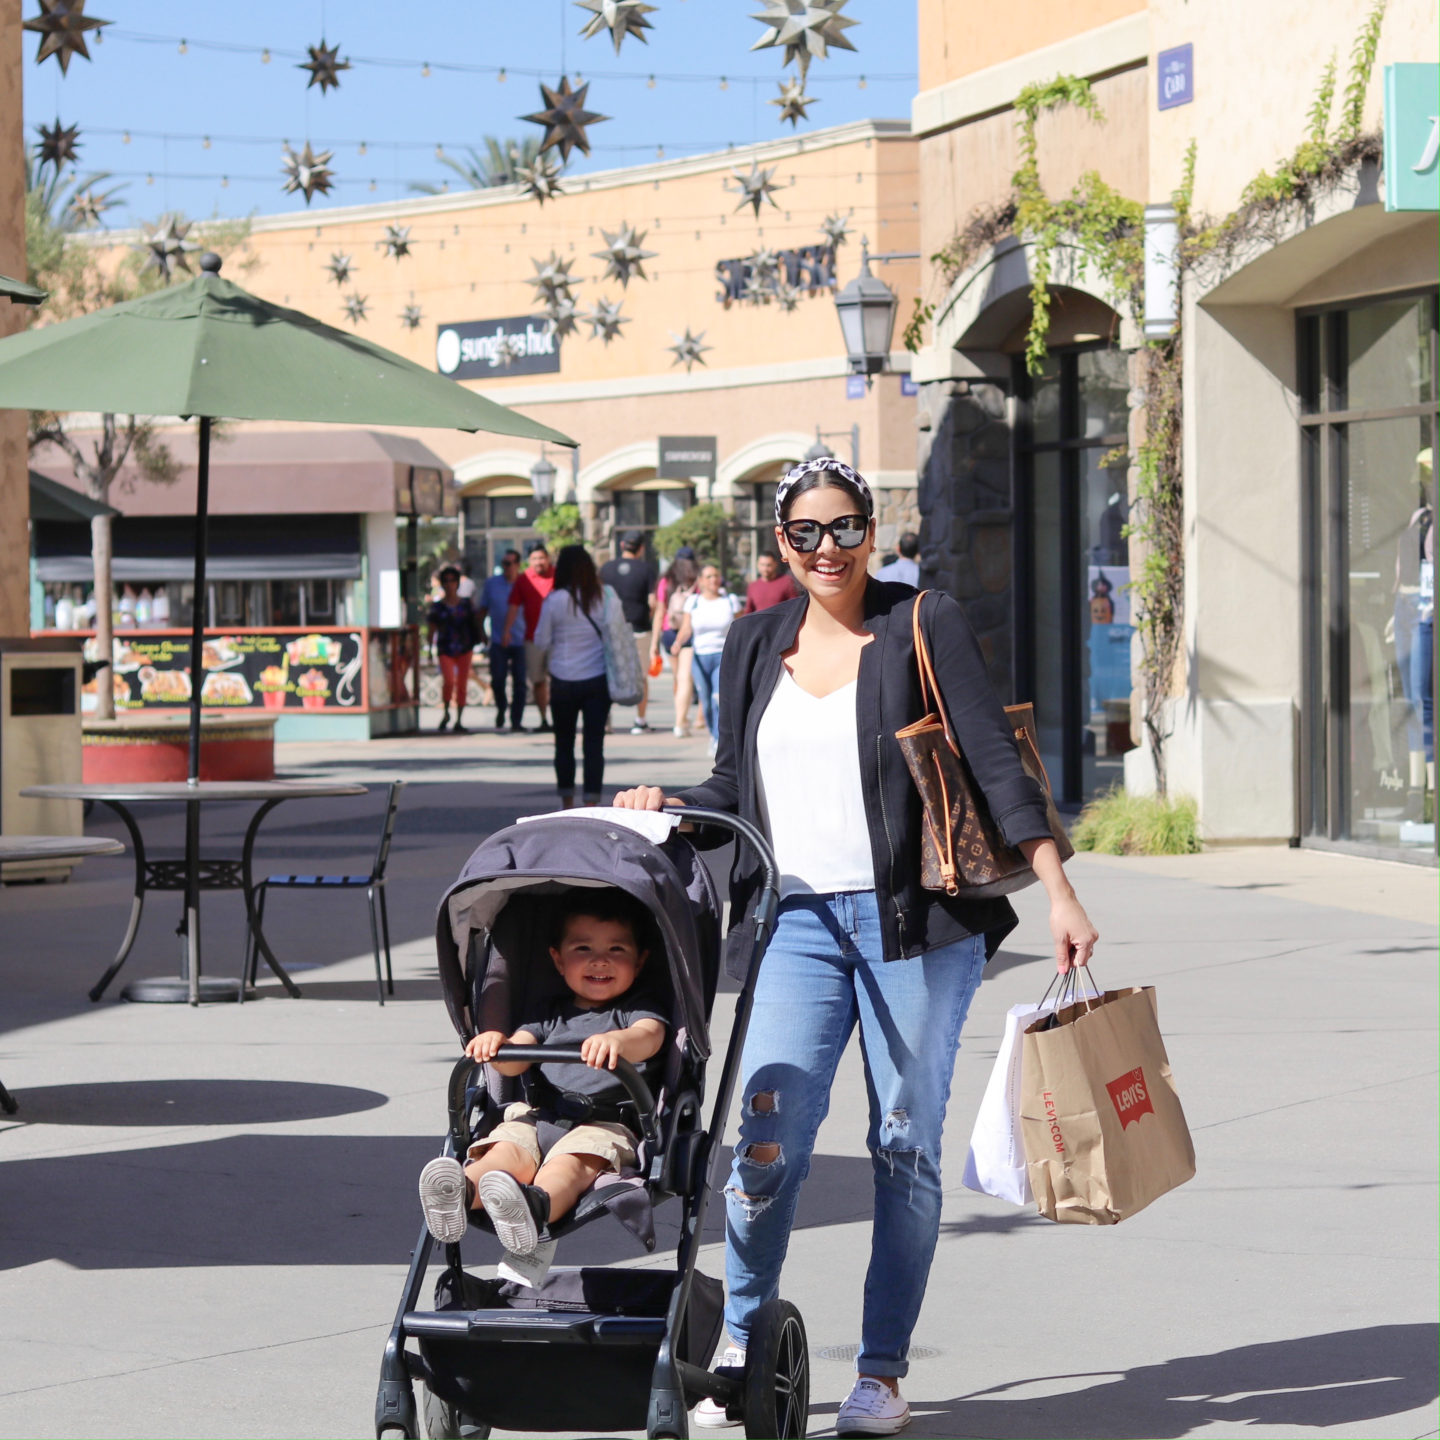 Getting Holiday Ready with Las Americas Premium Outlets